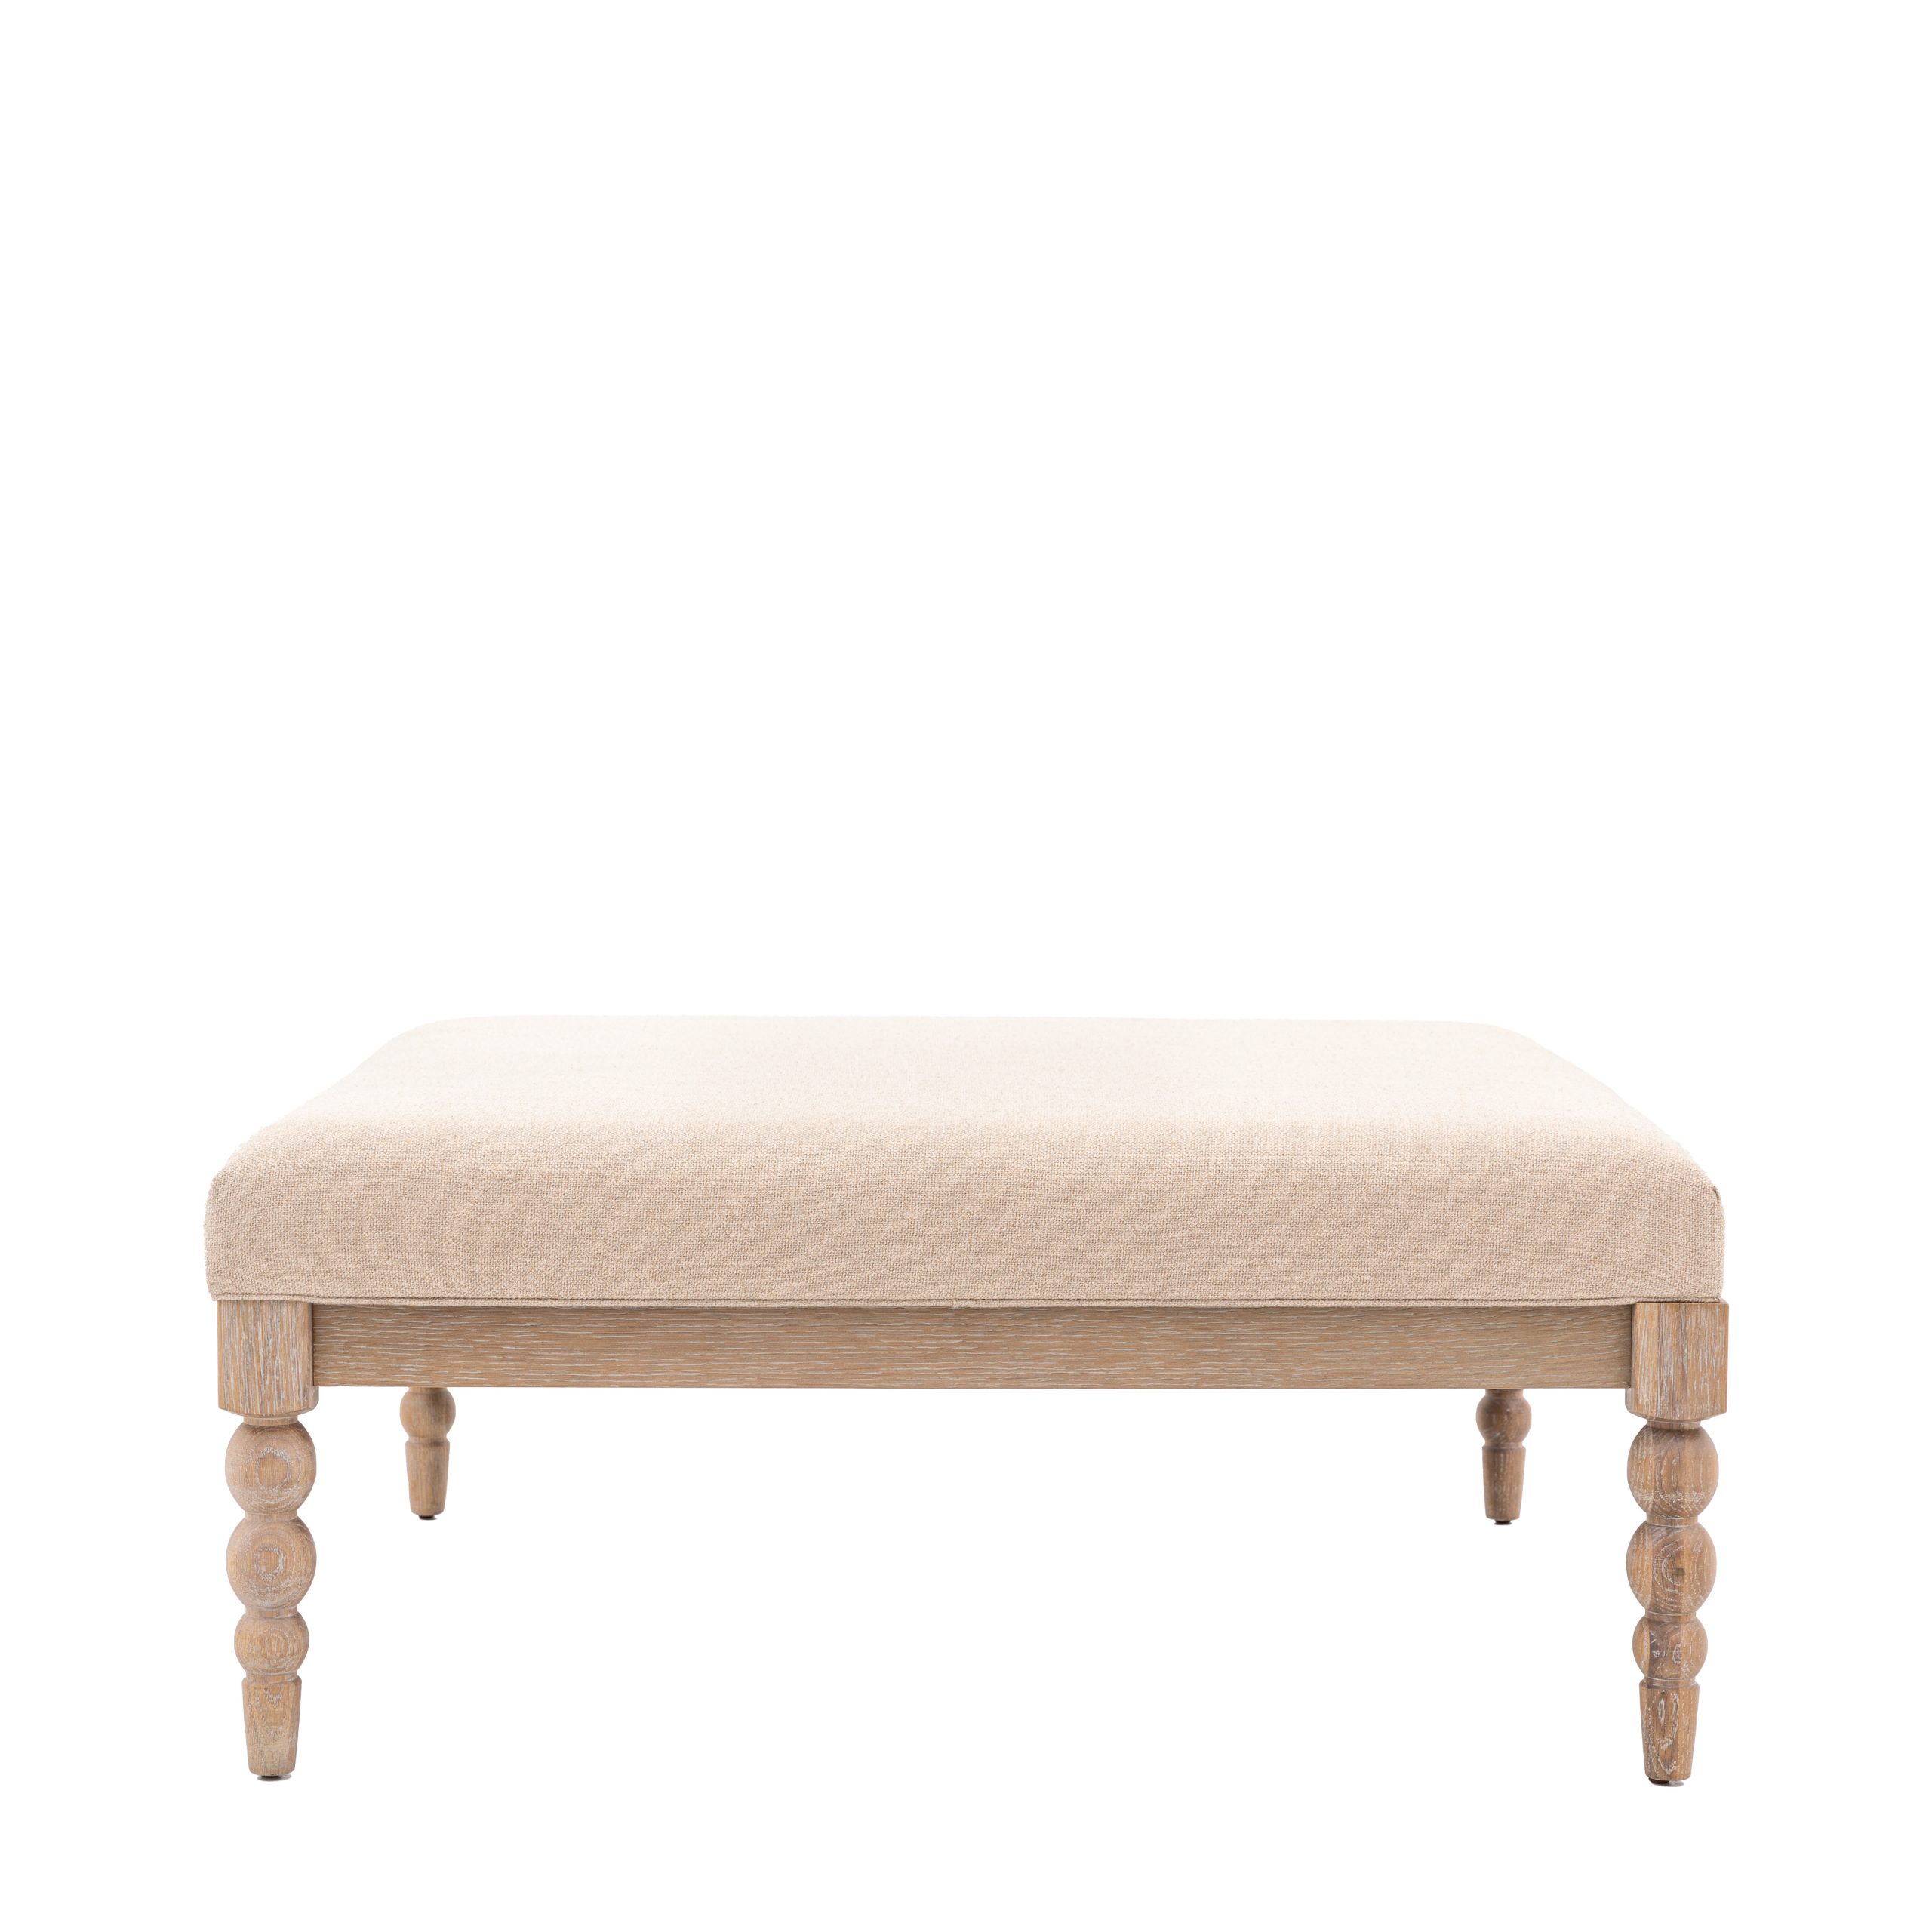 Gallery Direct Artisan Coffee Table